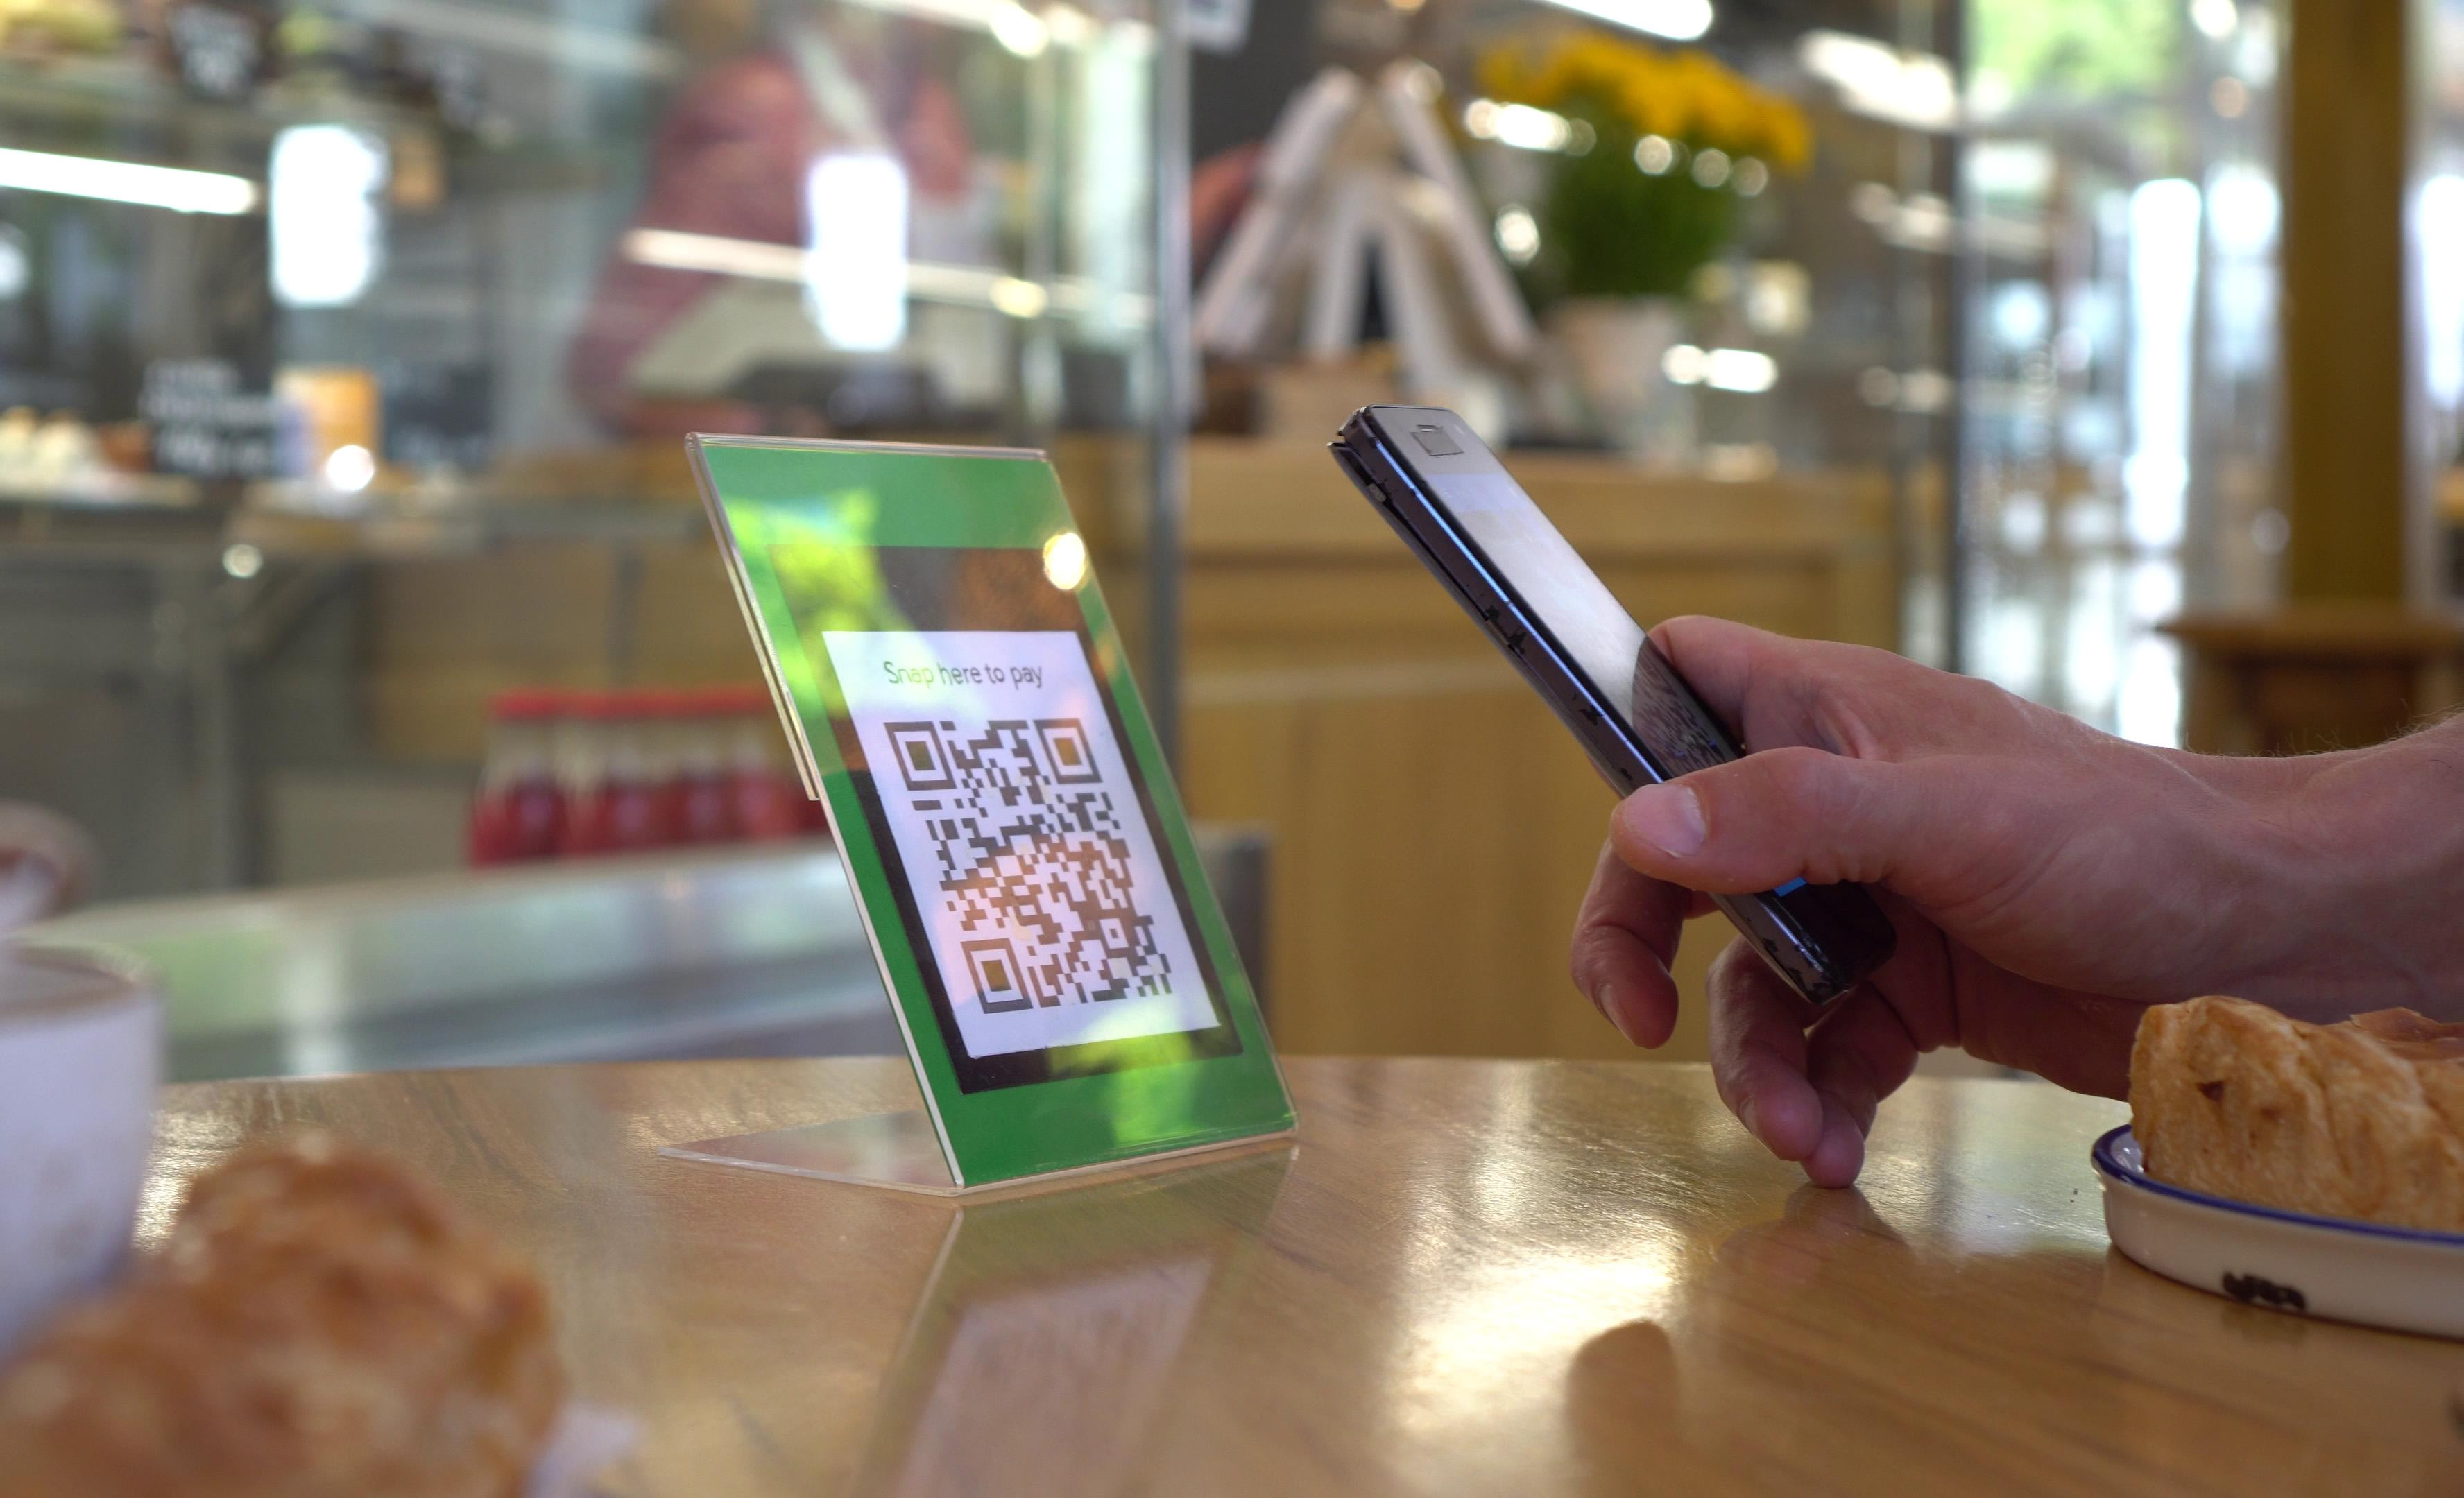 A customer uses their smartphone to scan a QR code at a table set with baked goods.